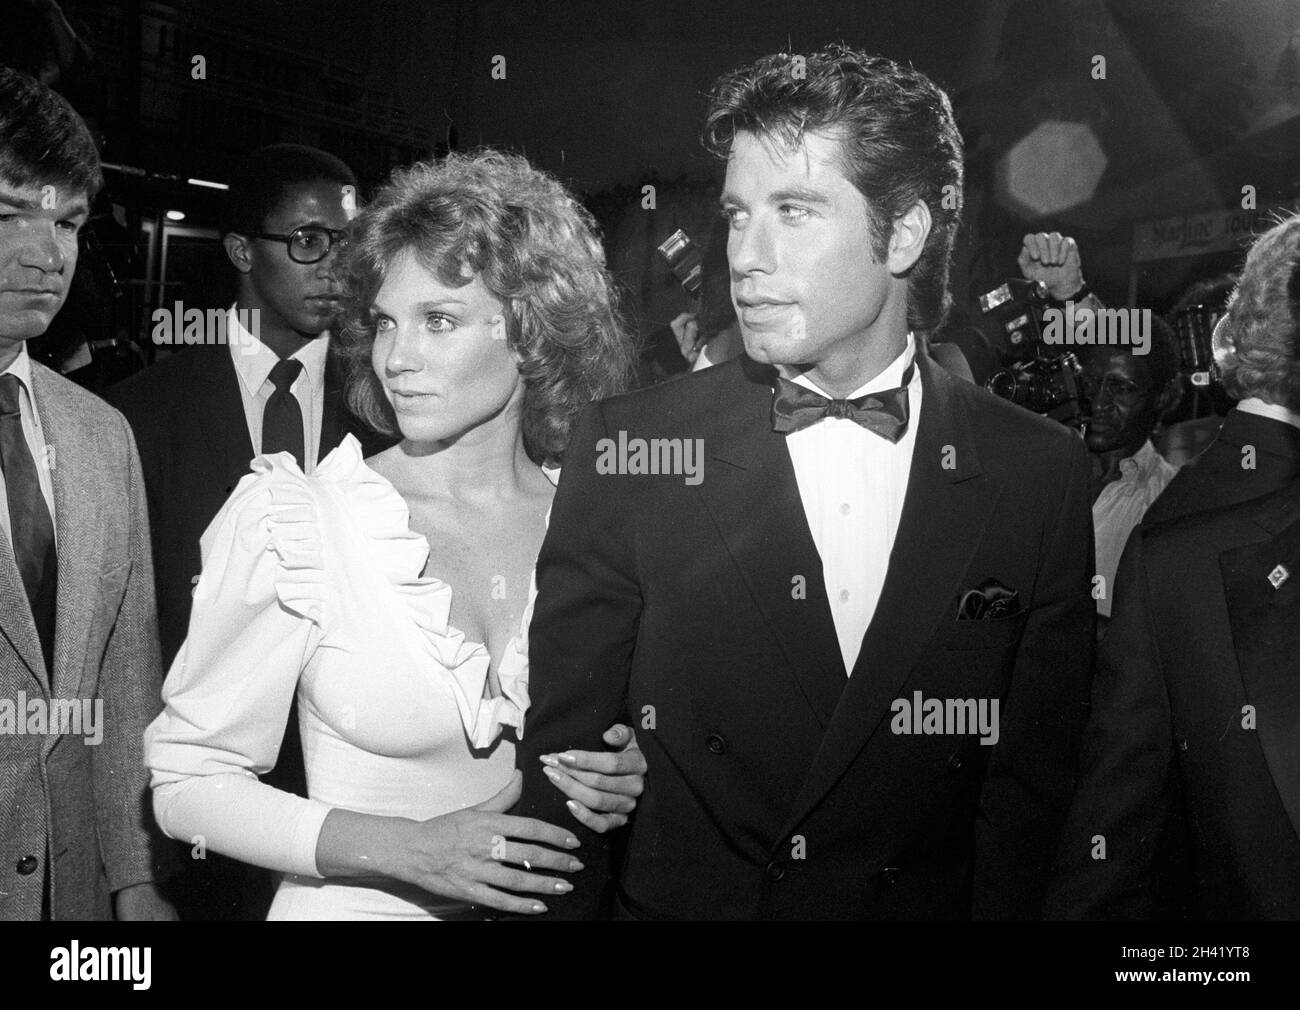 Marilu Henner and John Travolta at the premiere of Stayin' Alive on ...